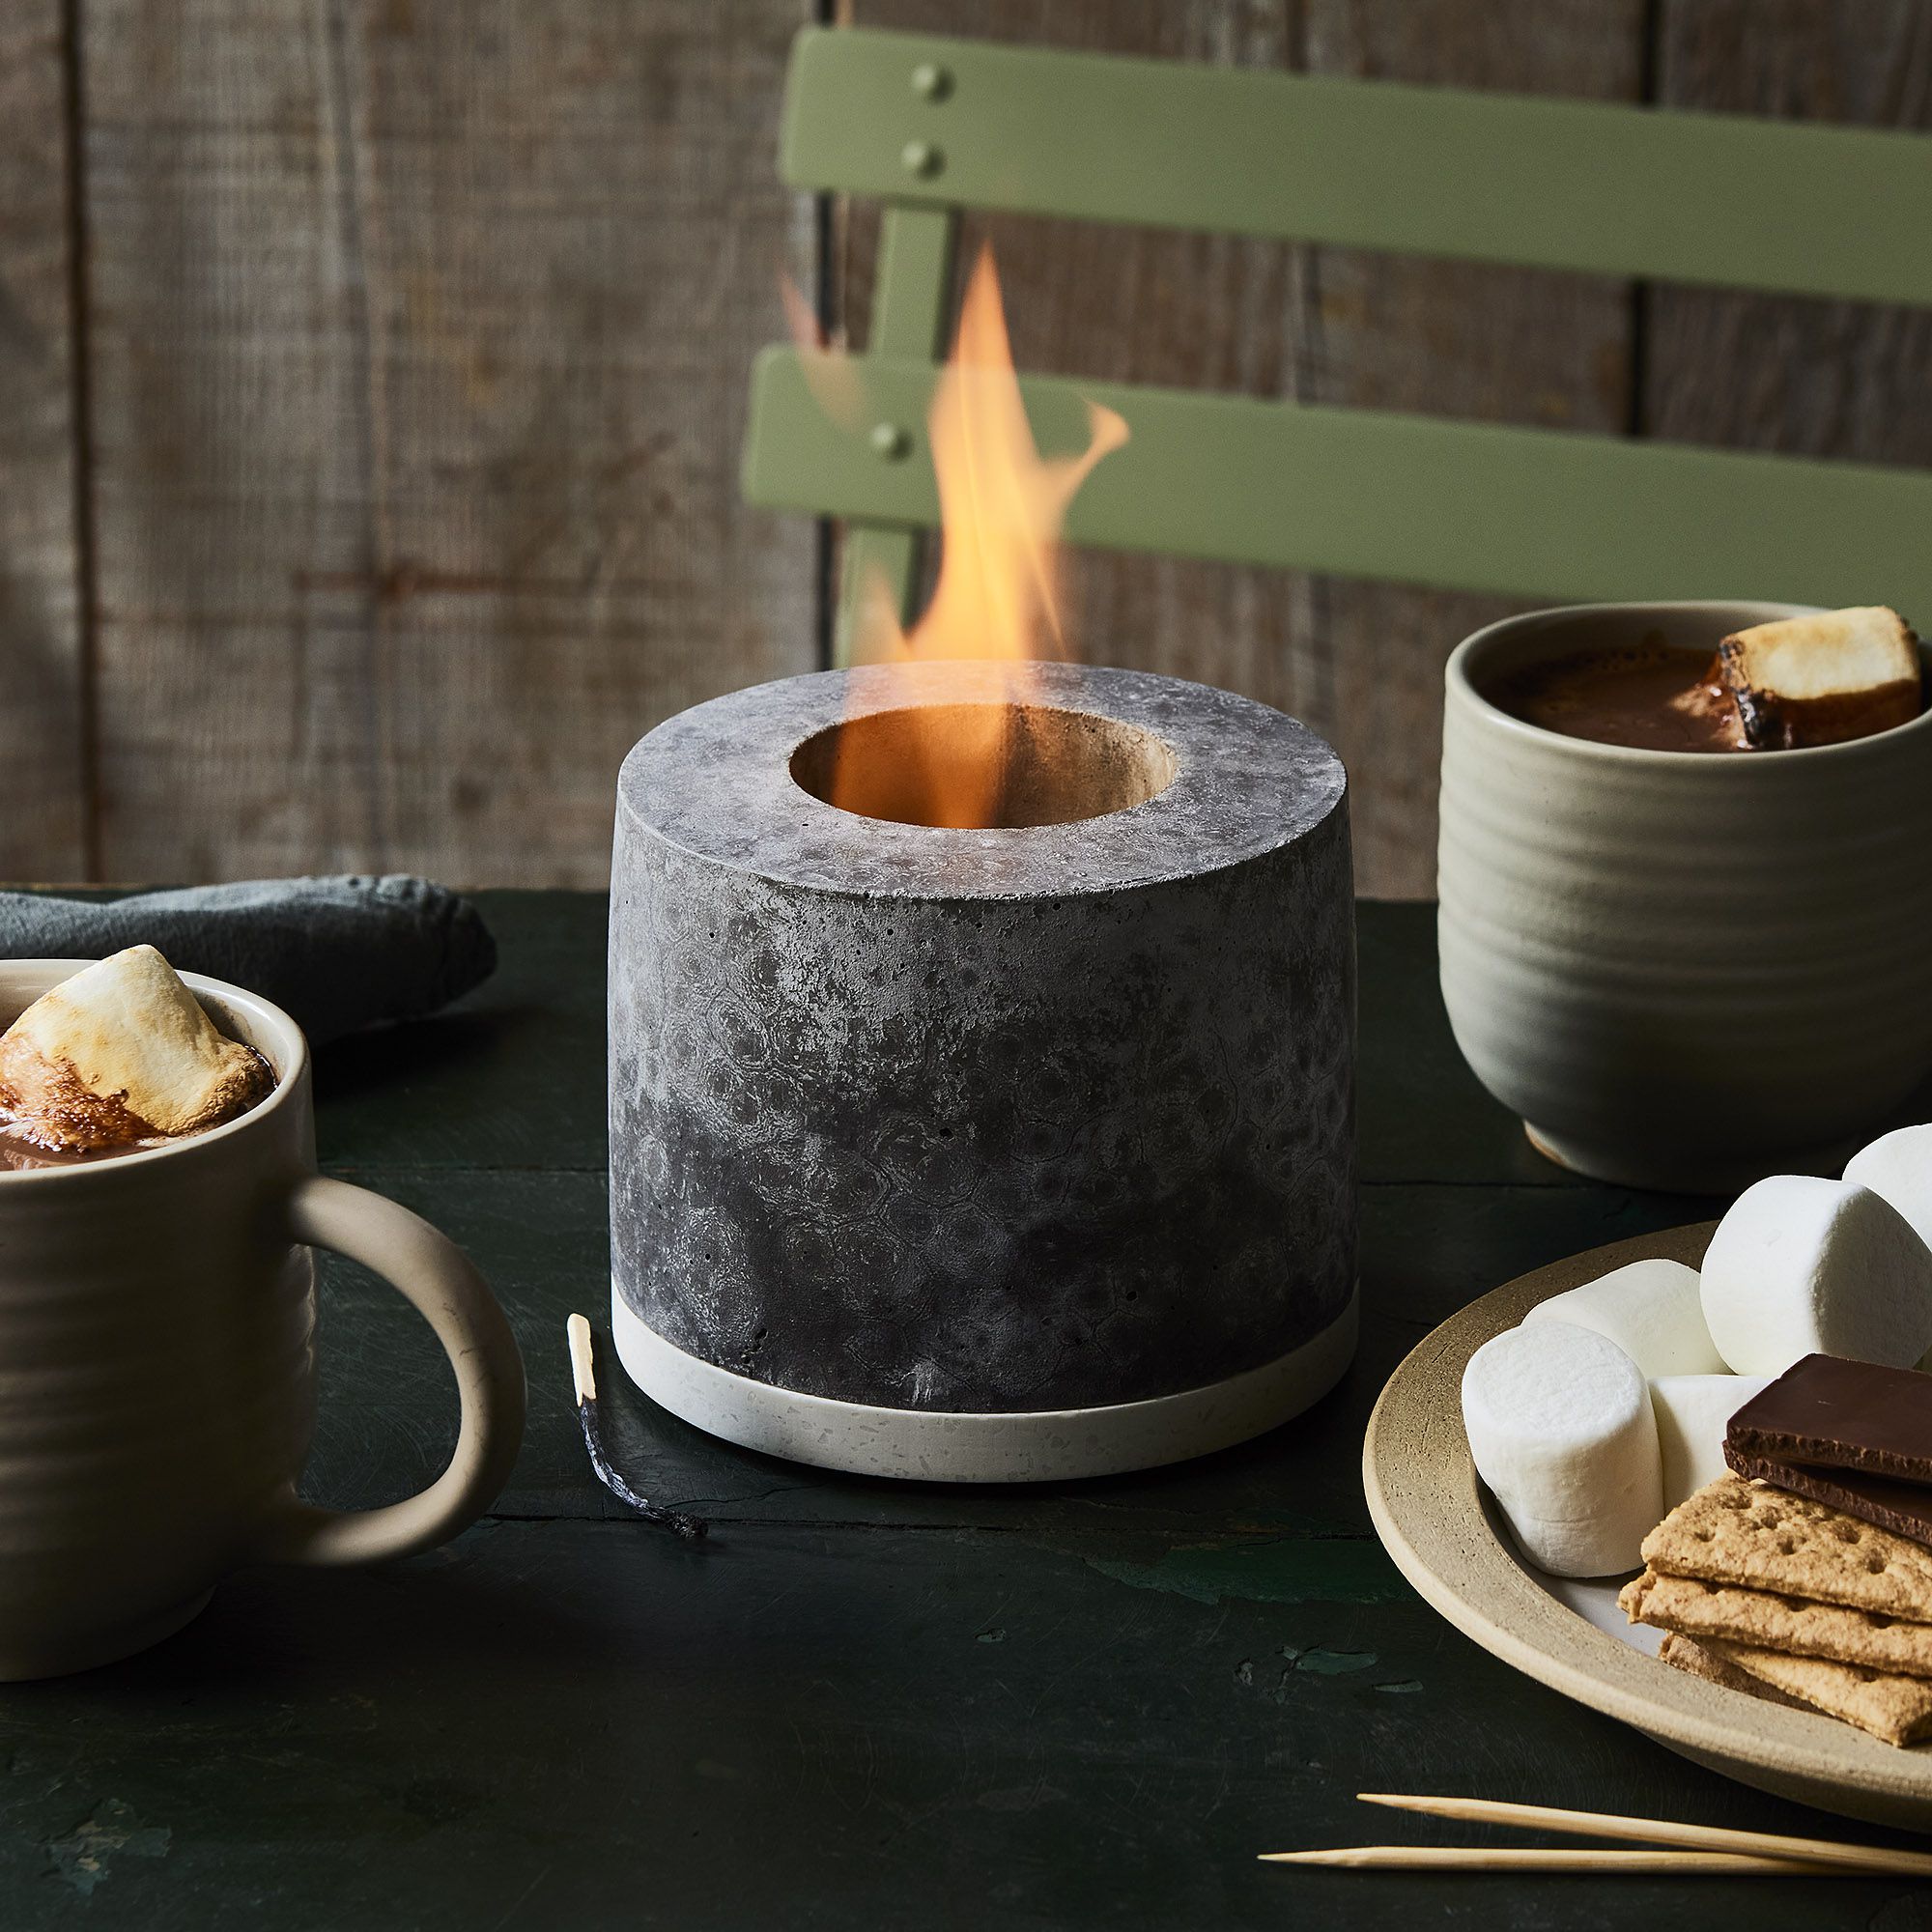 17 Outdoor Entertaining Essentials To Keep You Warm and Cozy